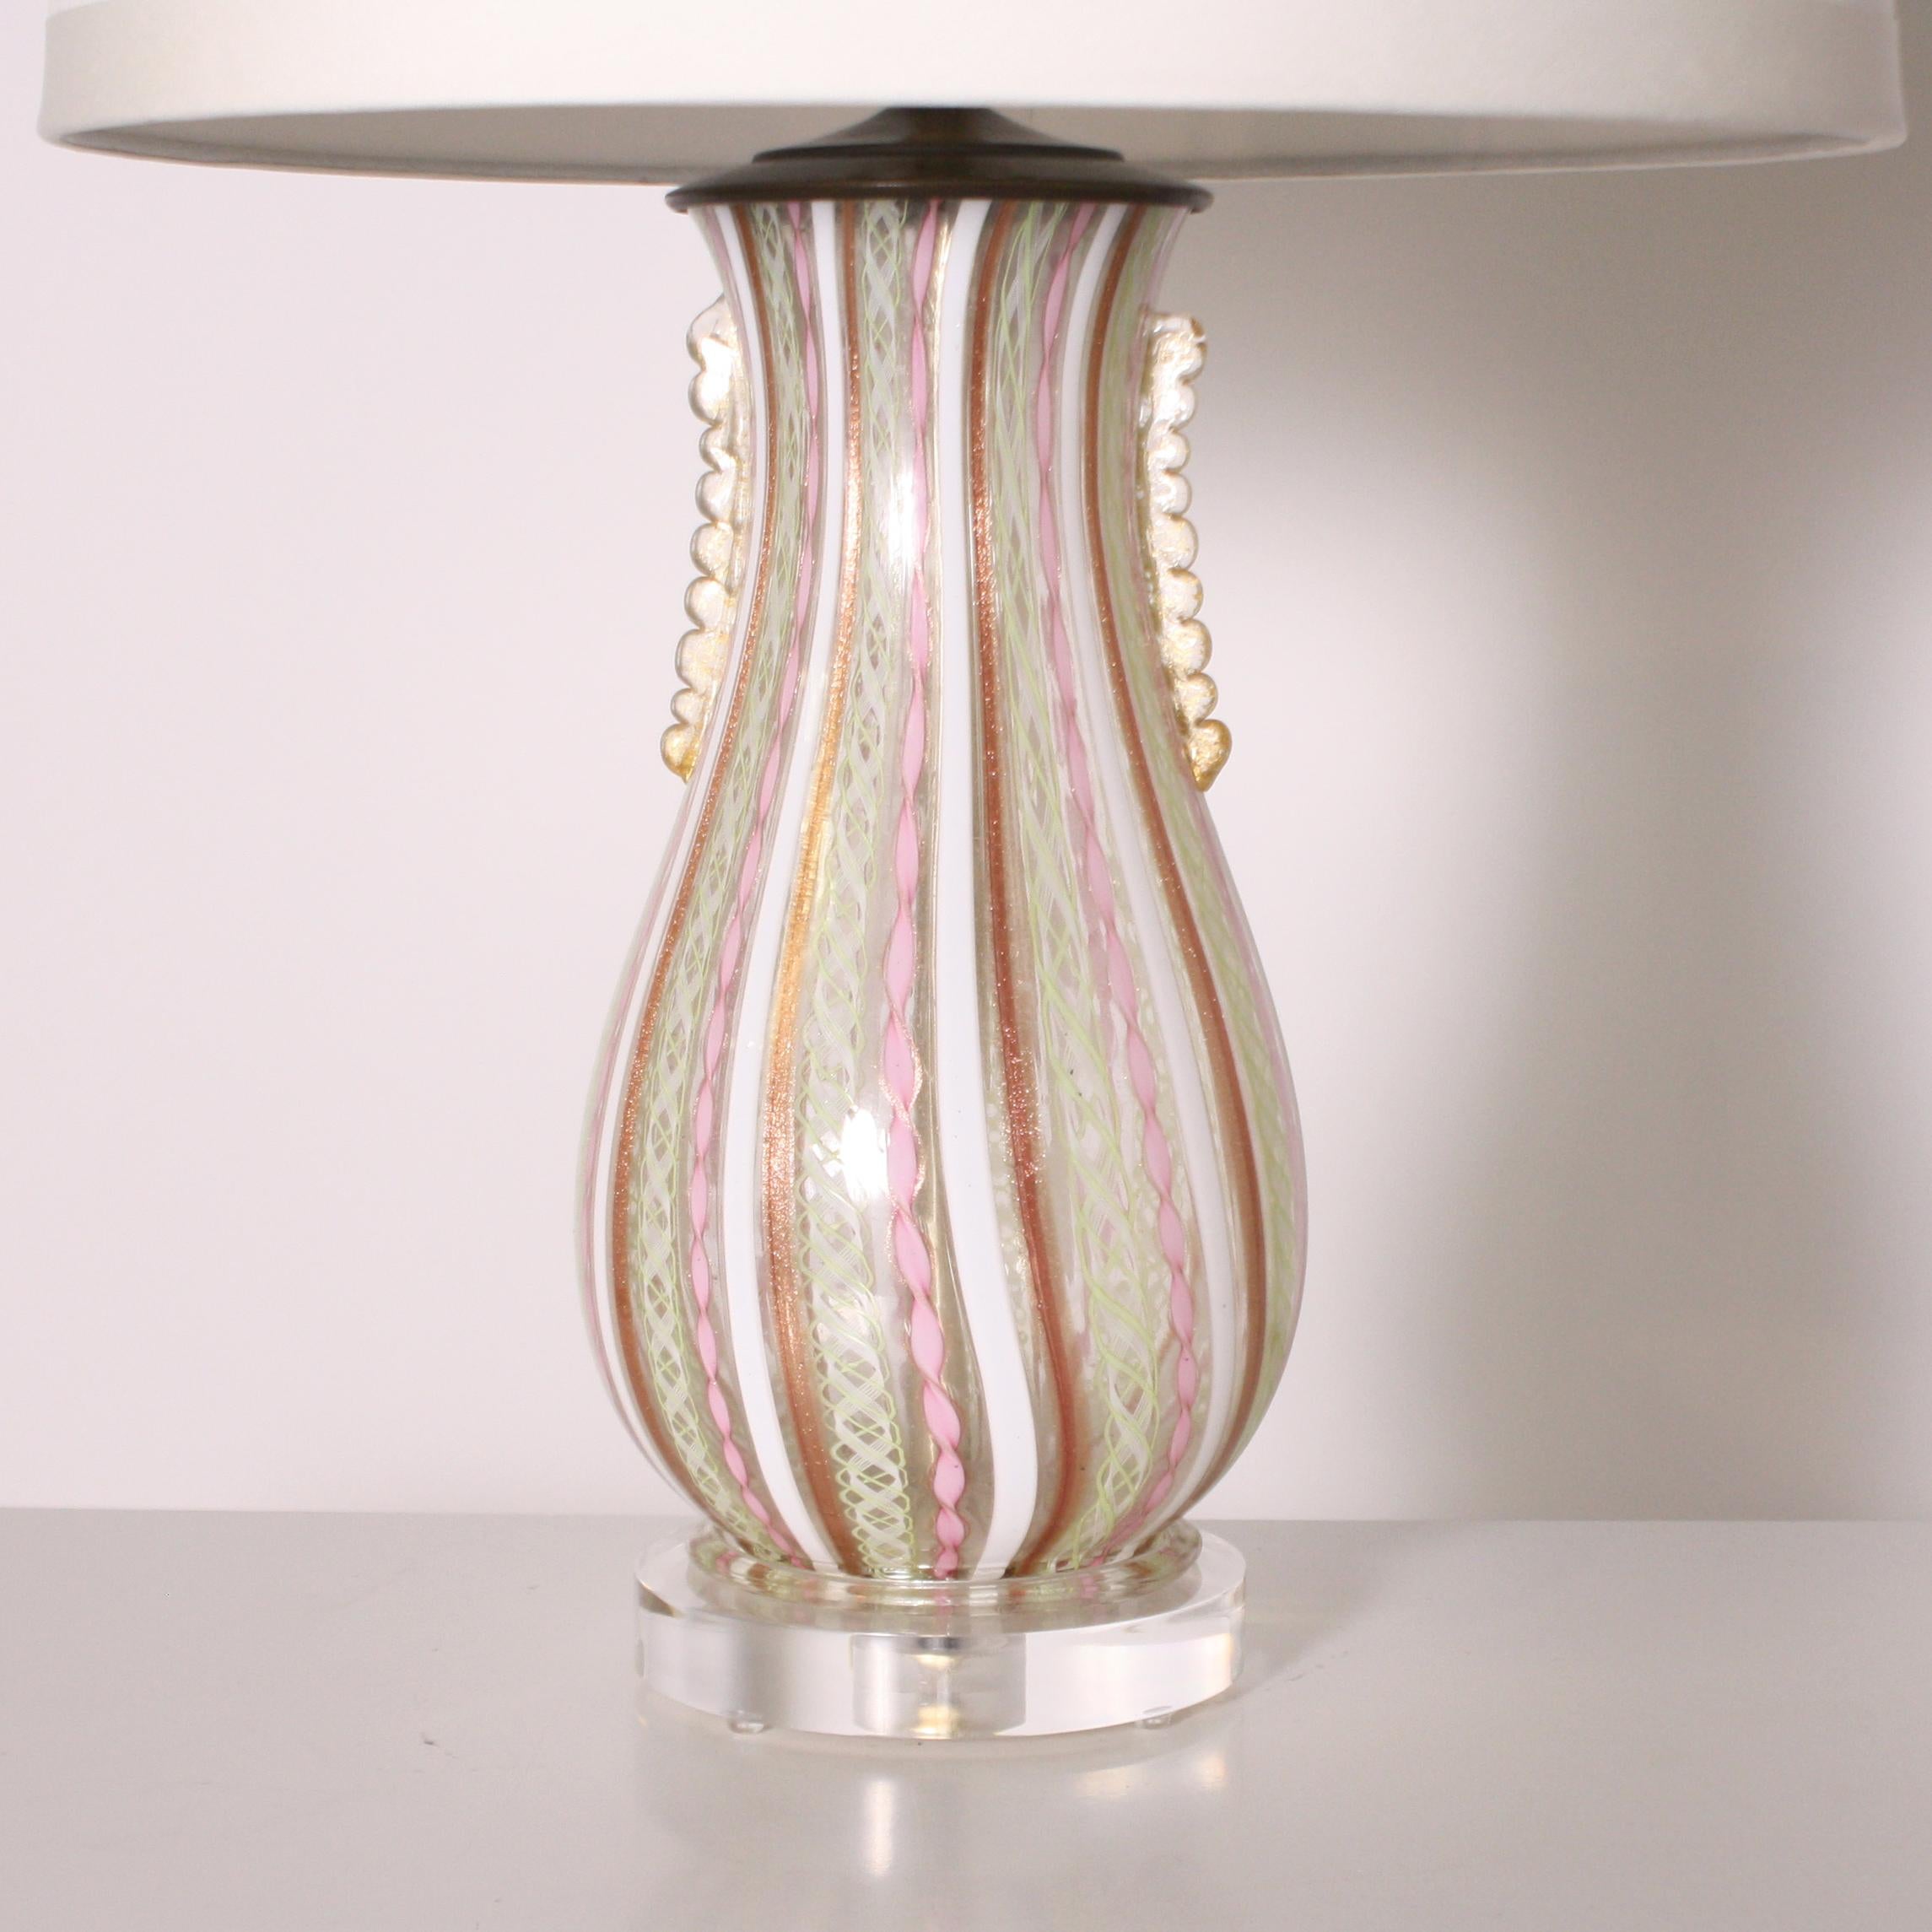 Fratelli Toso Murano lamp, circa 1950

Custom linen shade, crystal ball finial, Lucite base, gold twisted cording.